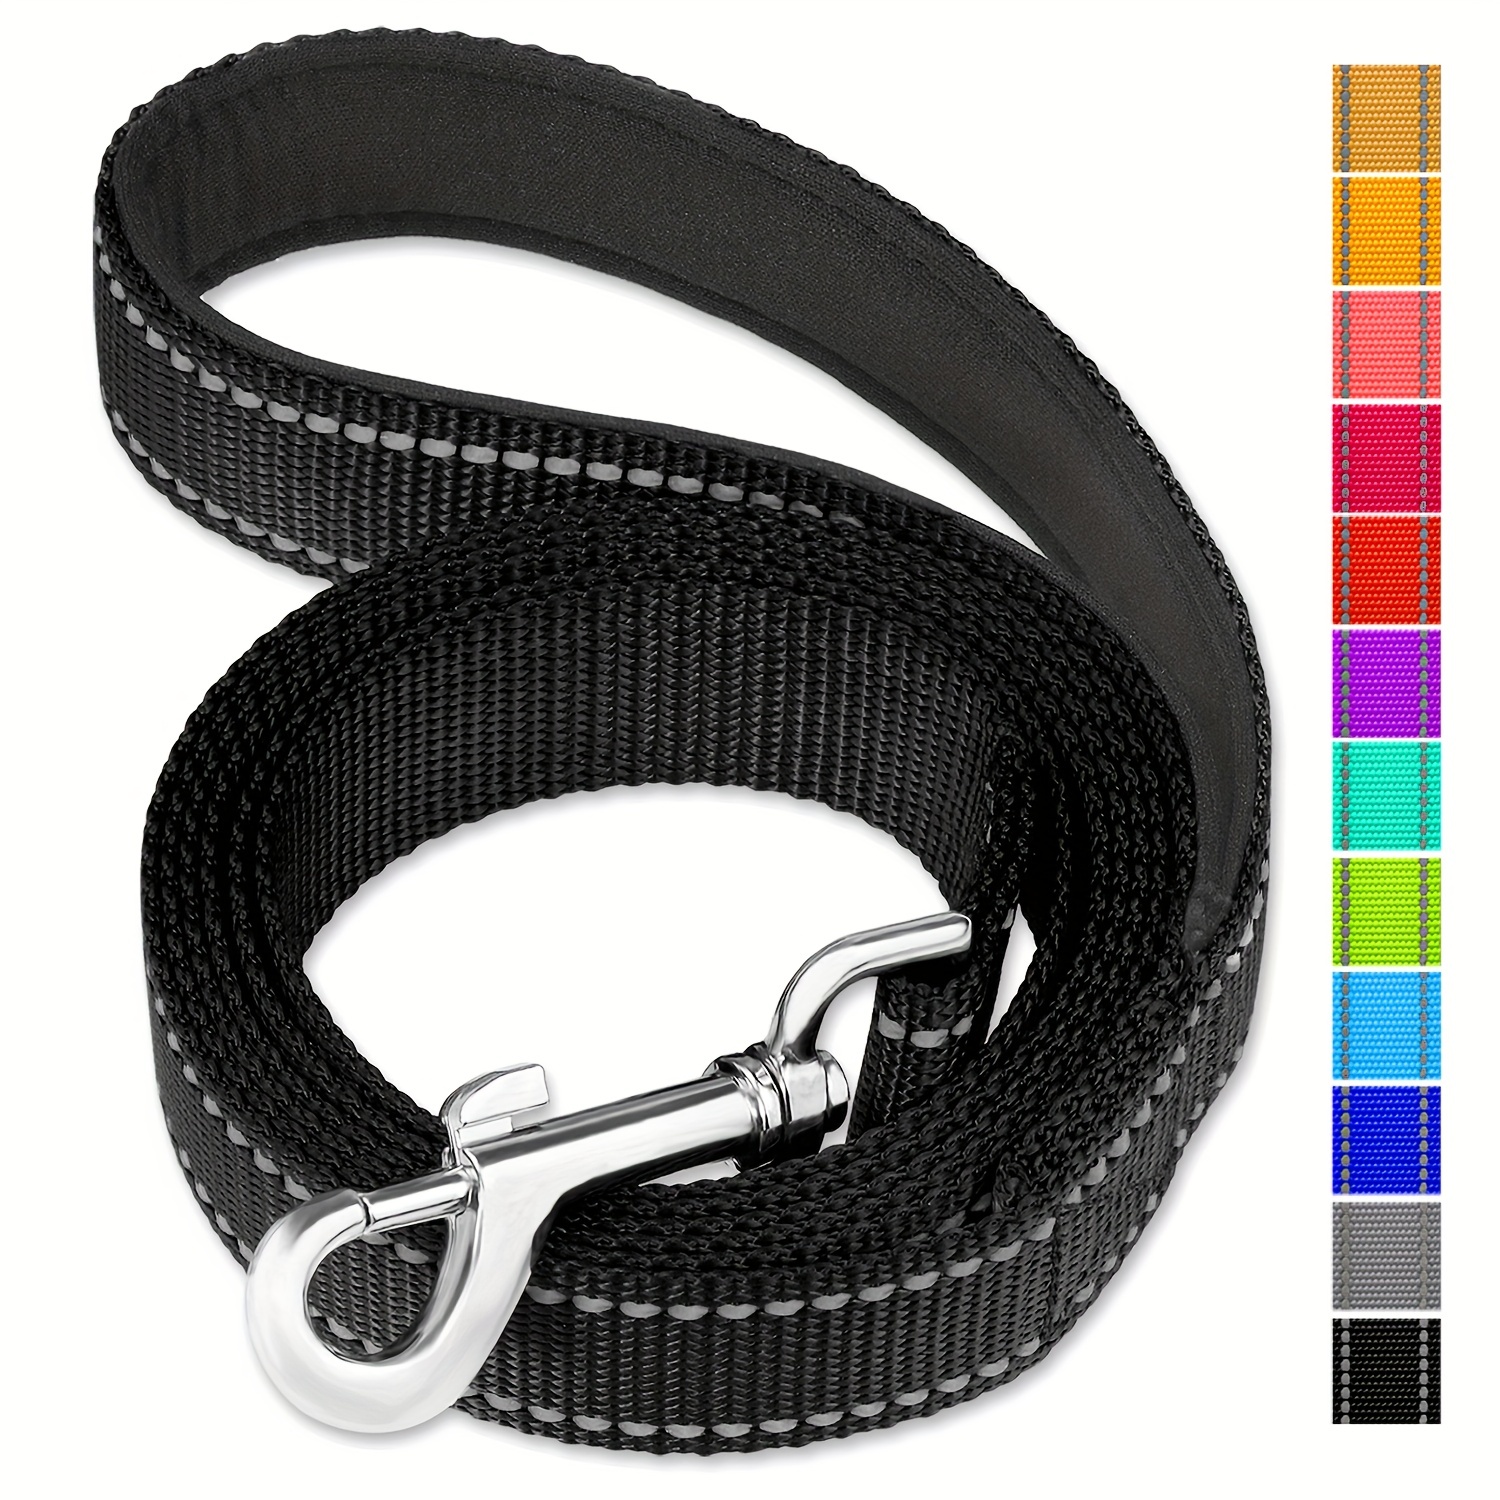 

Reflective Dog Leash With Soft Padded Handle For Training, Walking Lead For Medium & Small Dogs